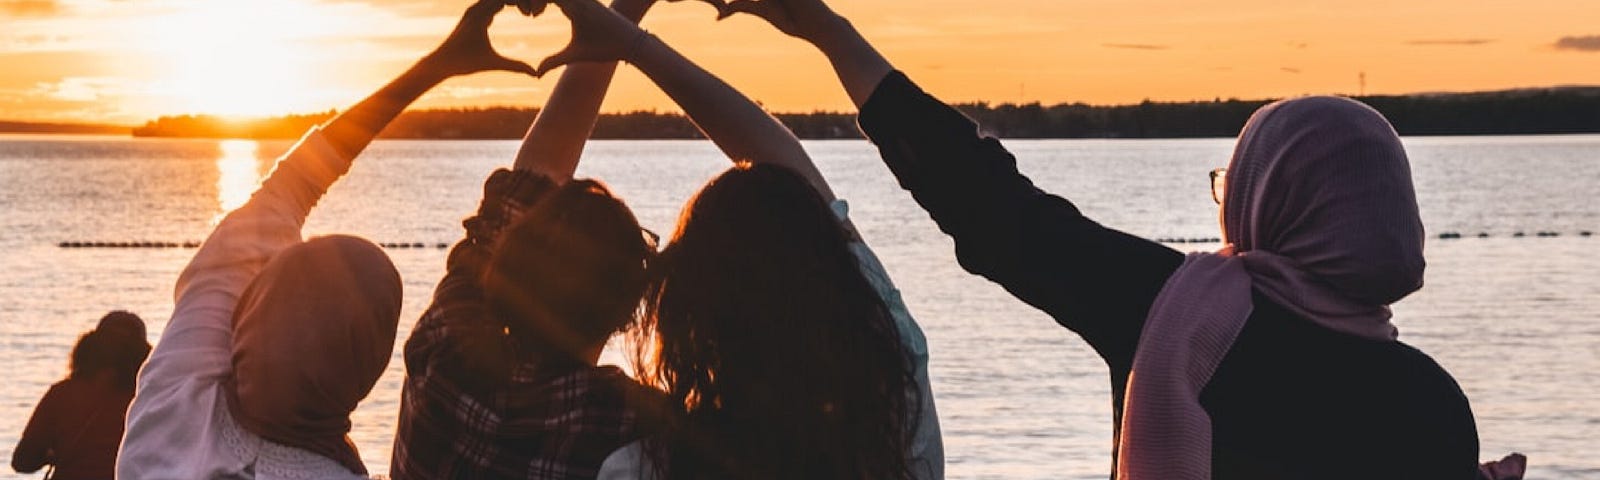 Four friends sitting on the beach at sunset while making the heart signs with their hands.